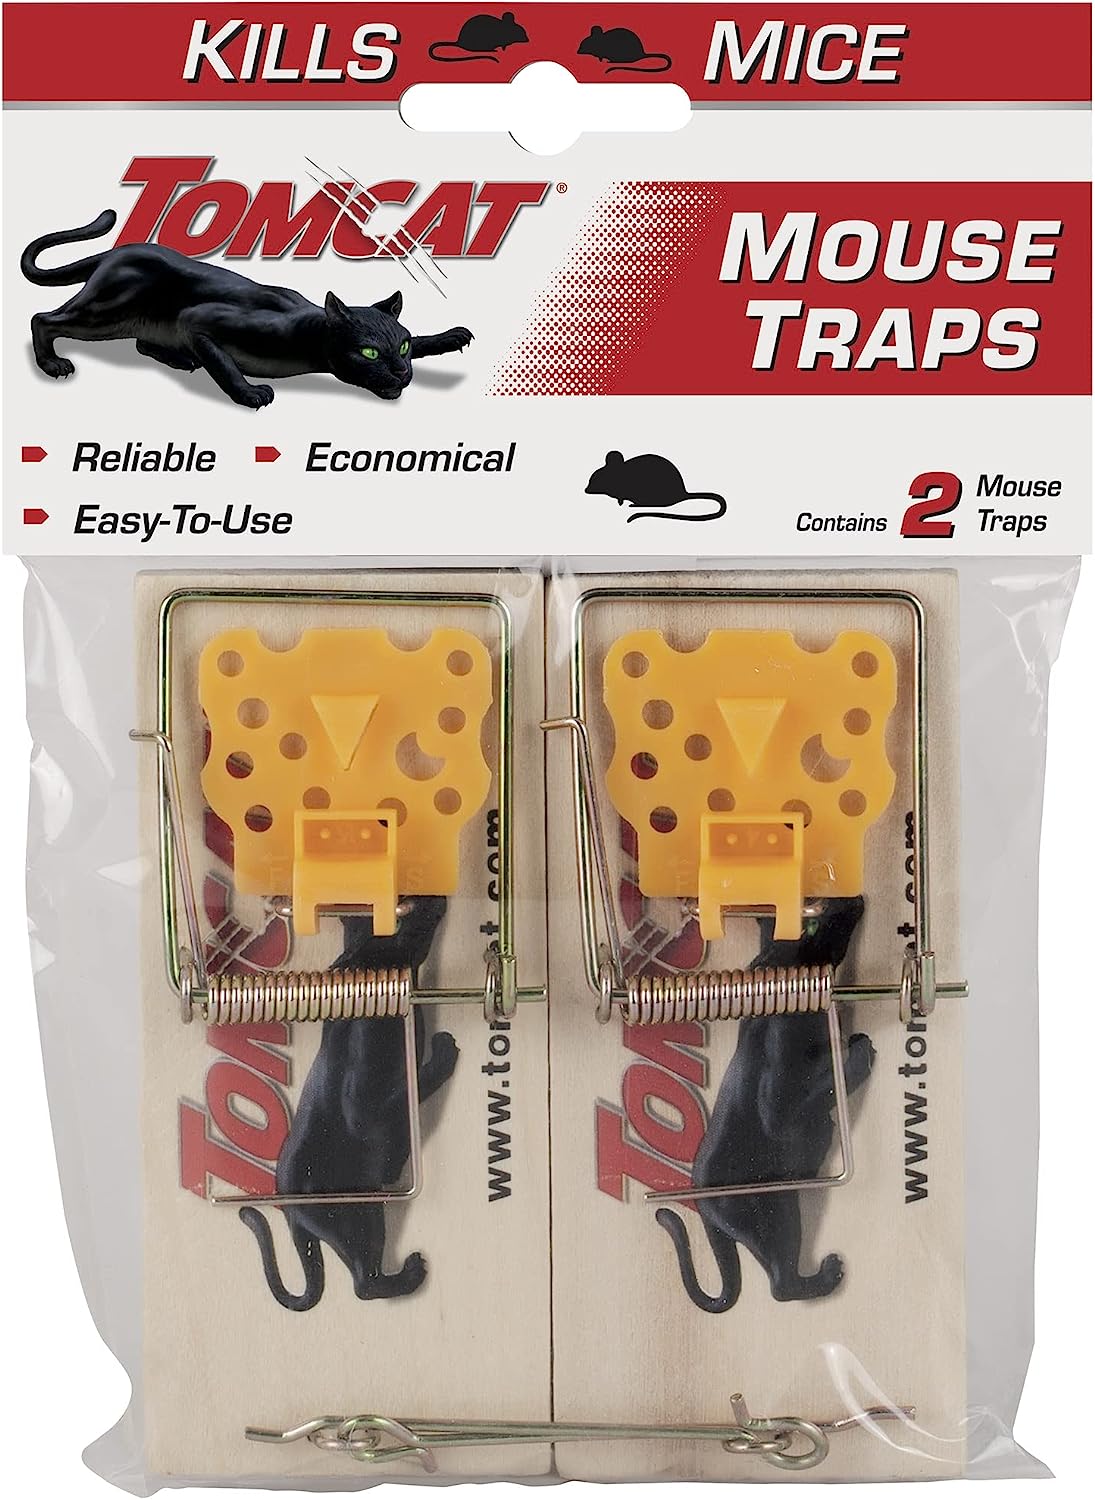 4 Wooden Mouse Traps | Quick Kill | Inexpensive & Effective